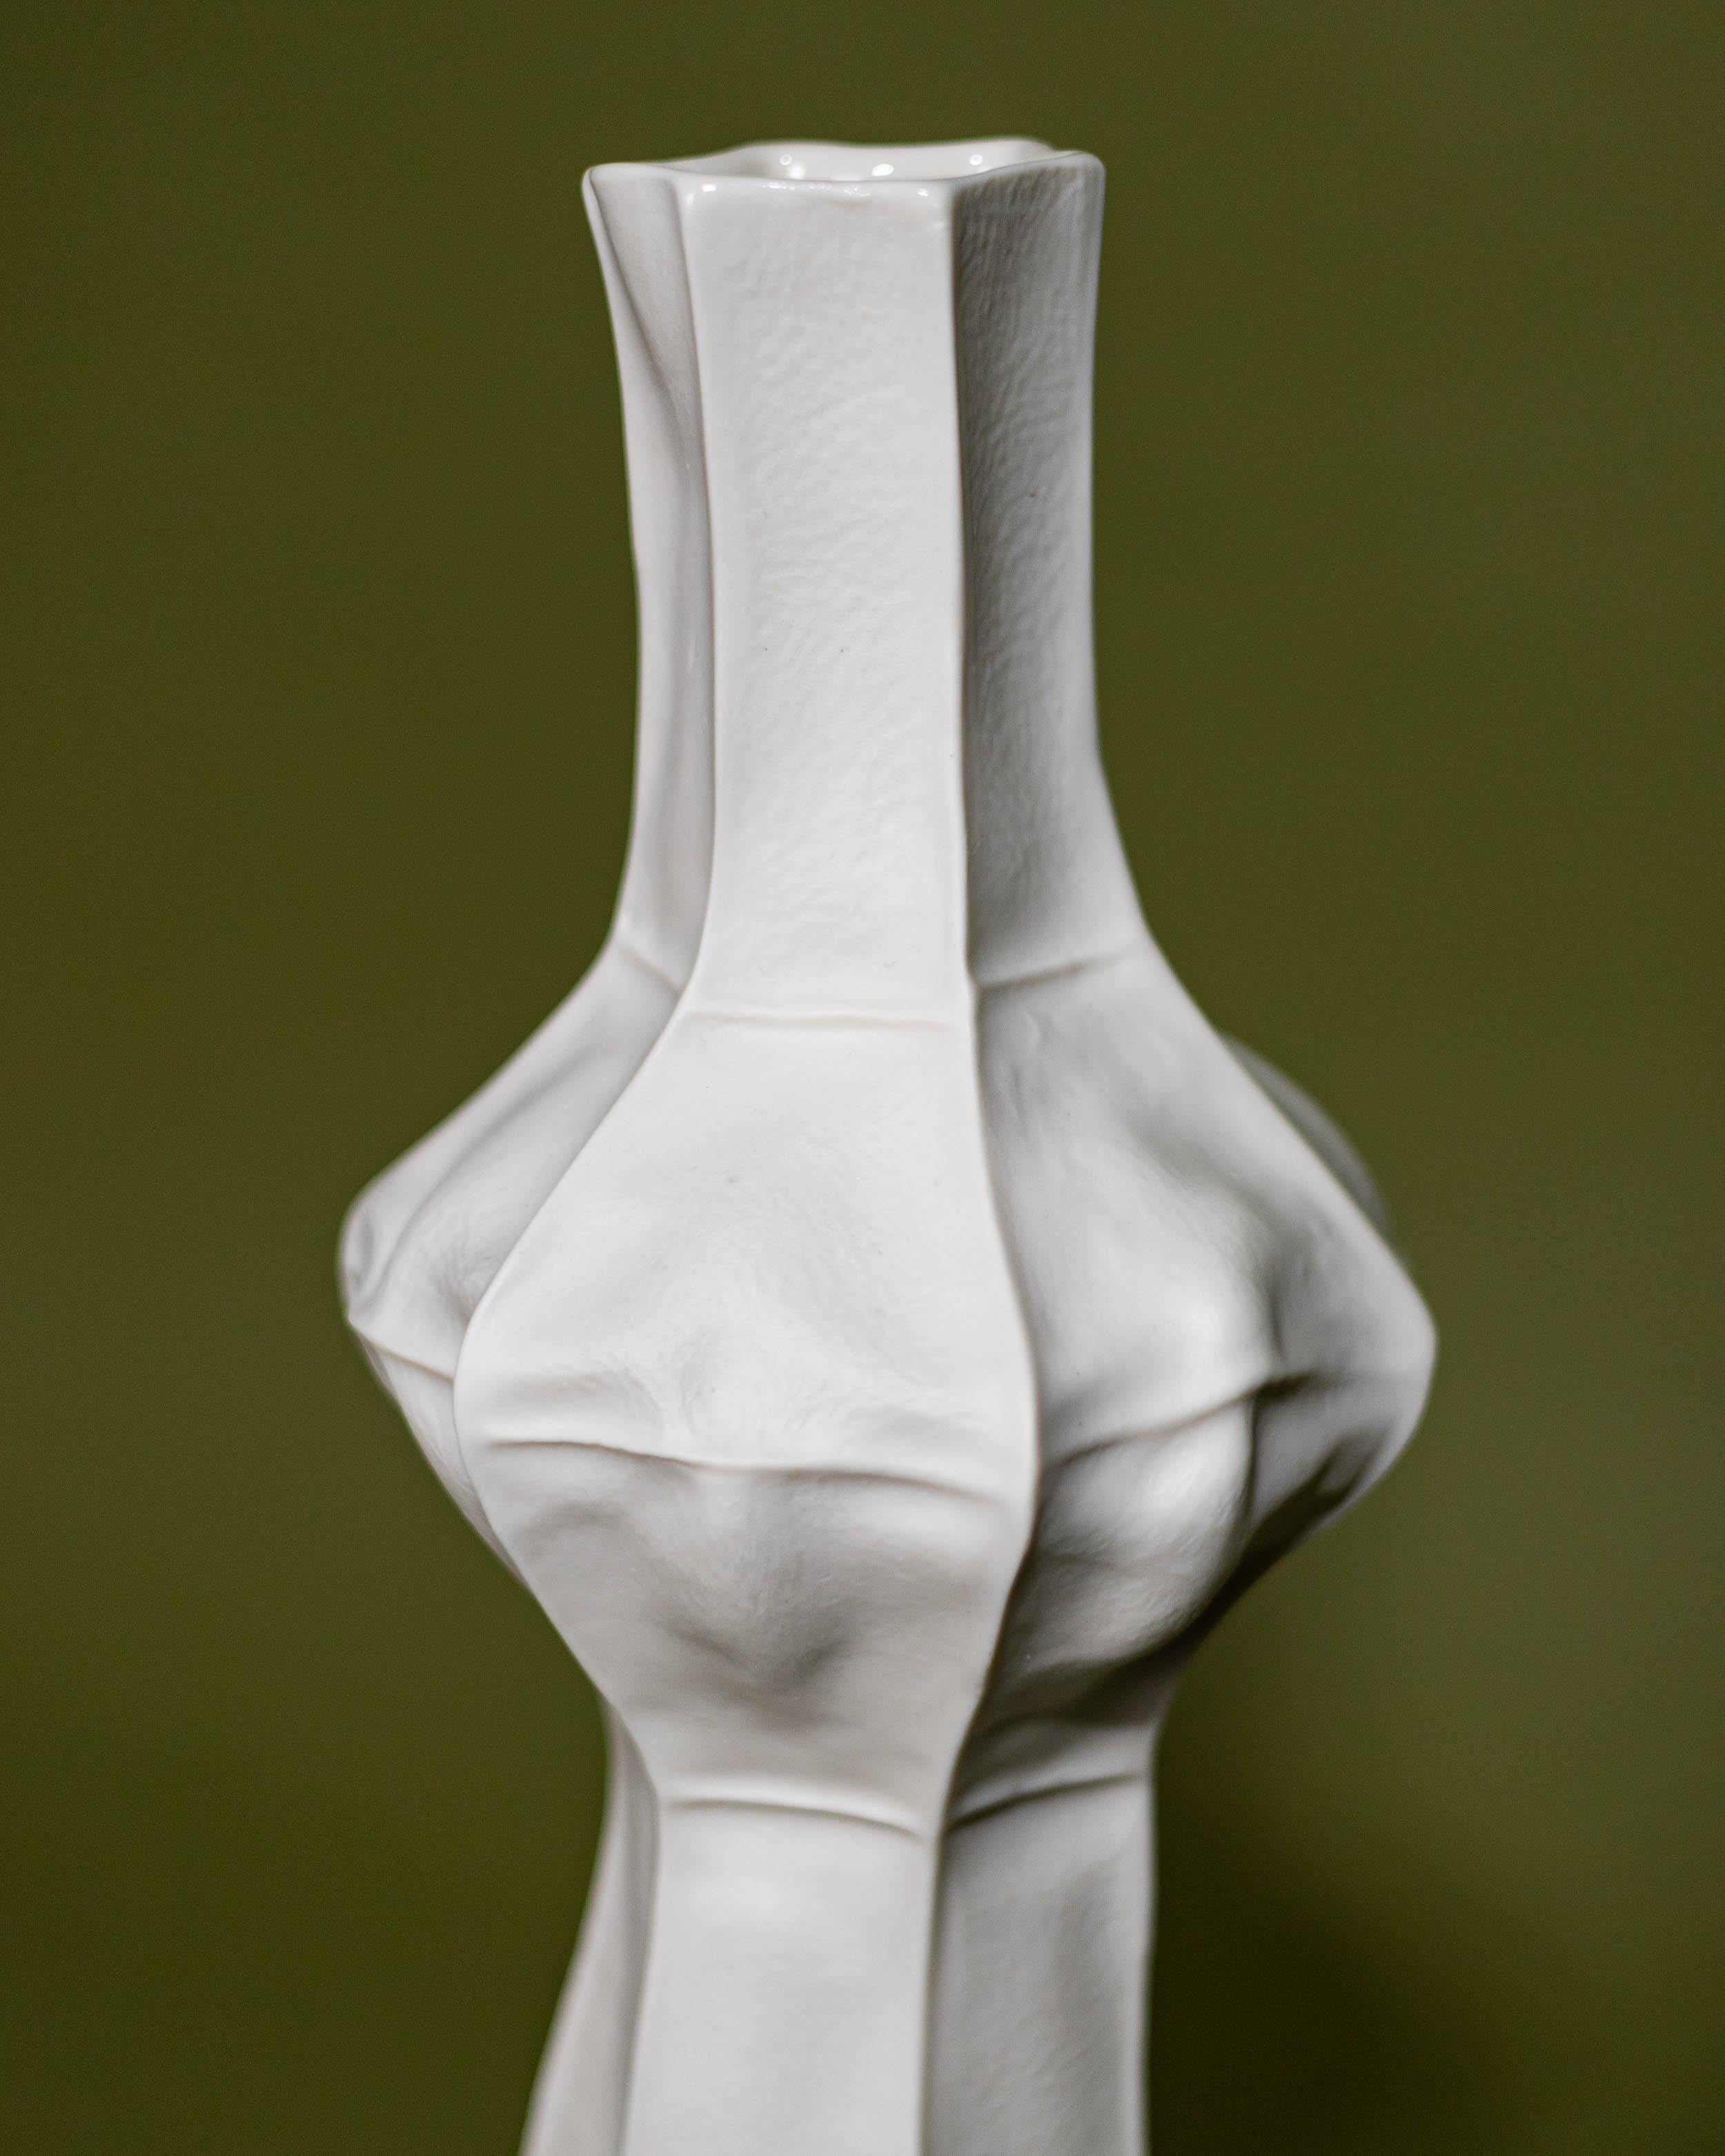 Other Pair of Sculptural White Ceramic Kawa Vases, by Luft Tanaka, organic, porcelain For Sale